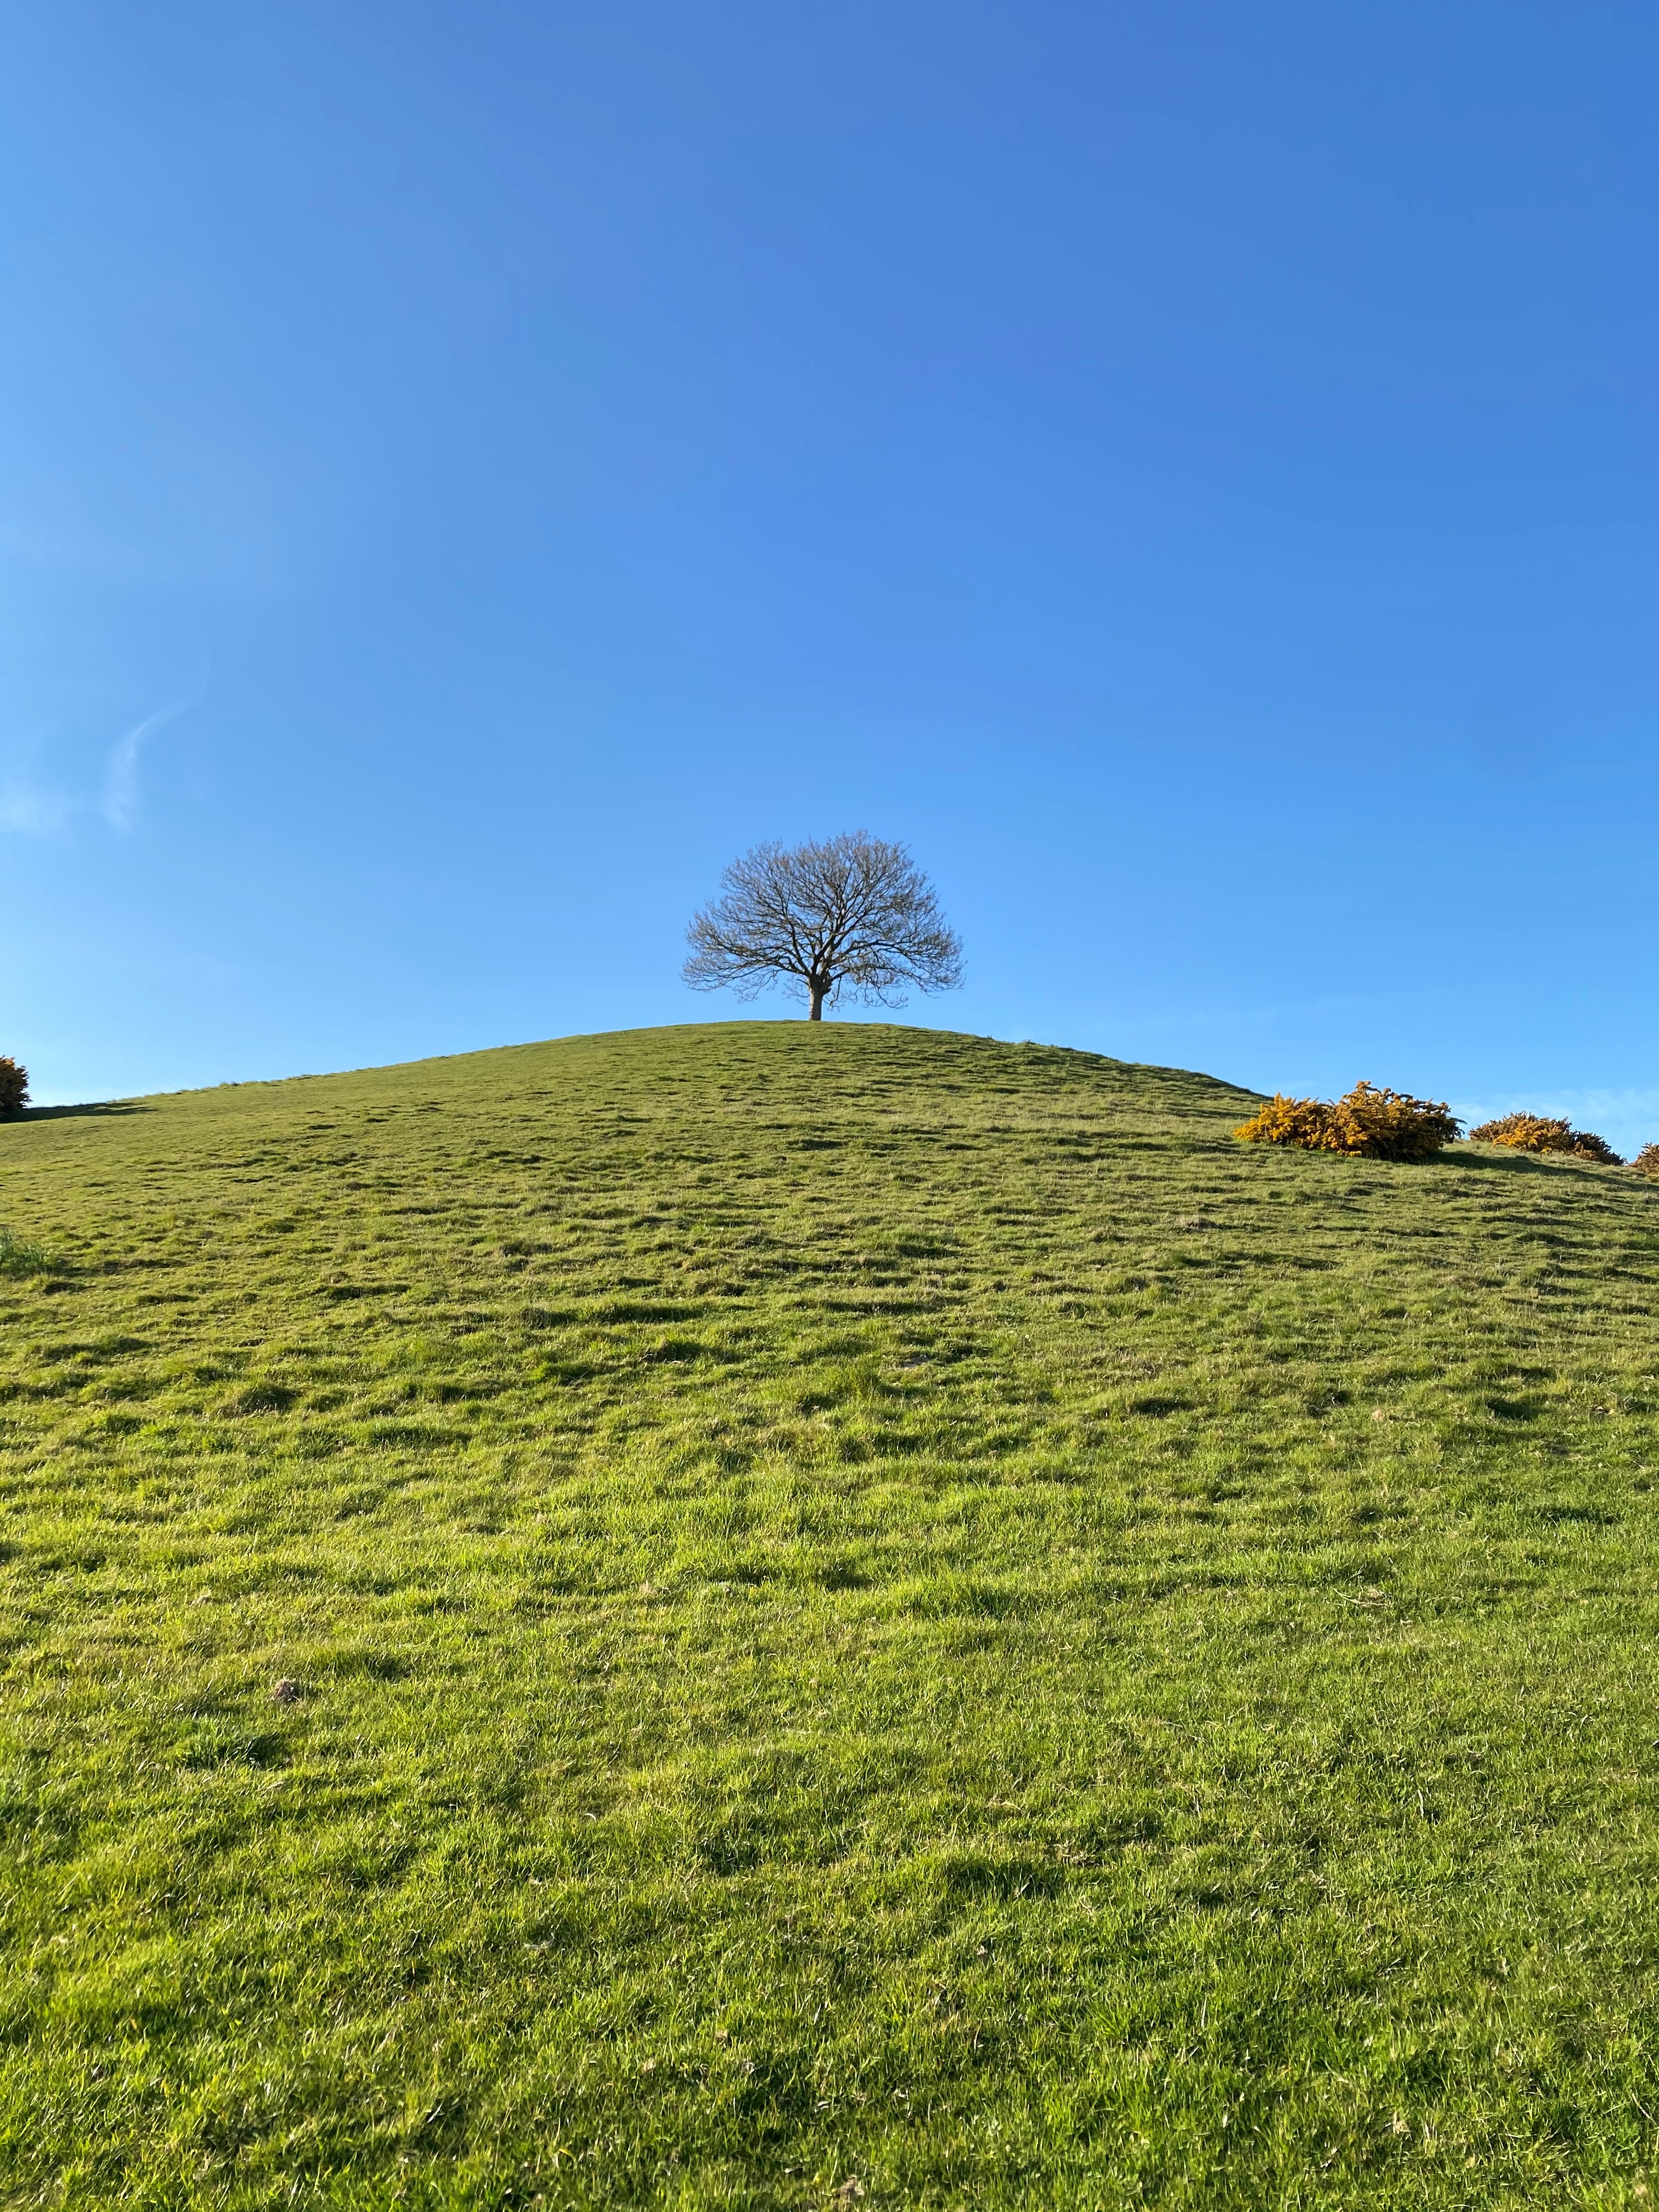 Burrow Hill - a single tree sits on top of a hill in the sunshine